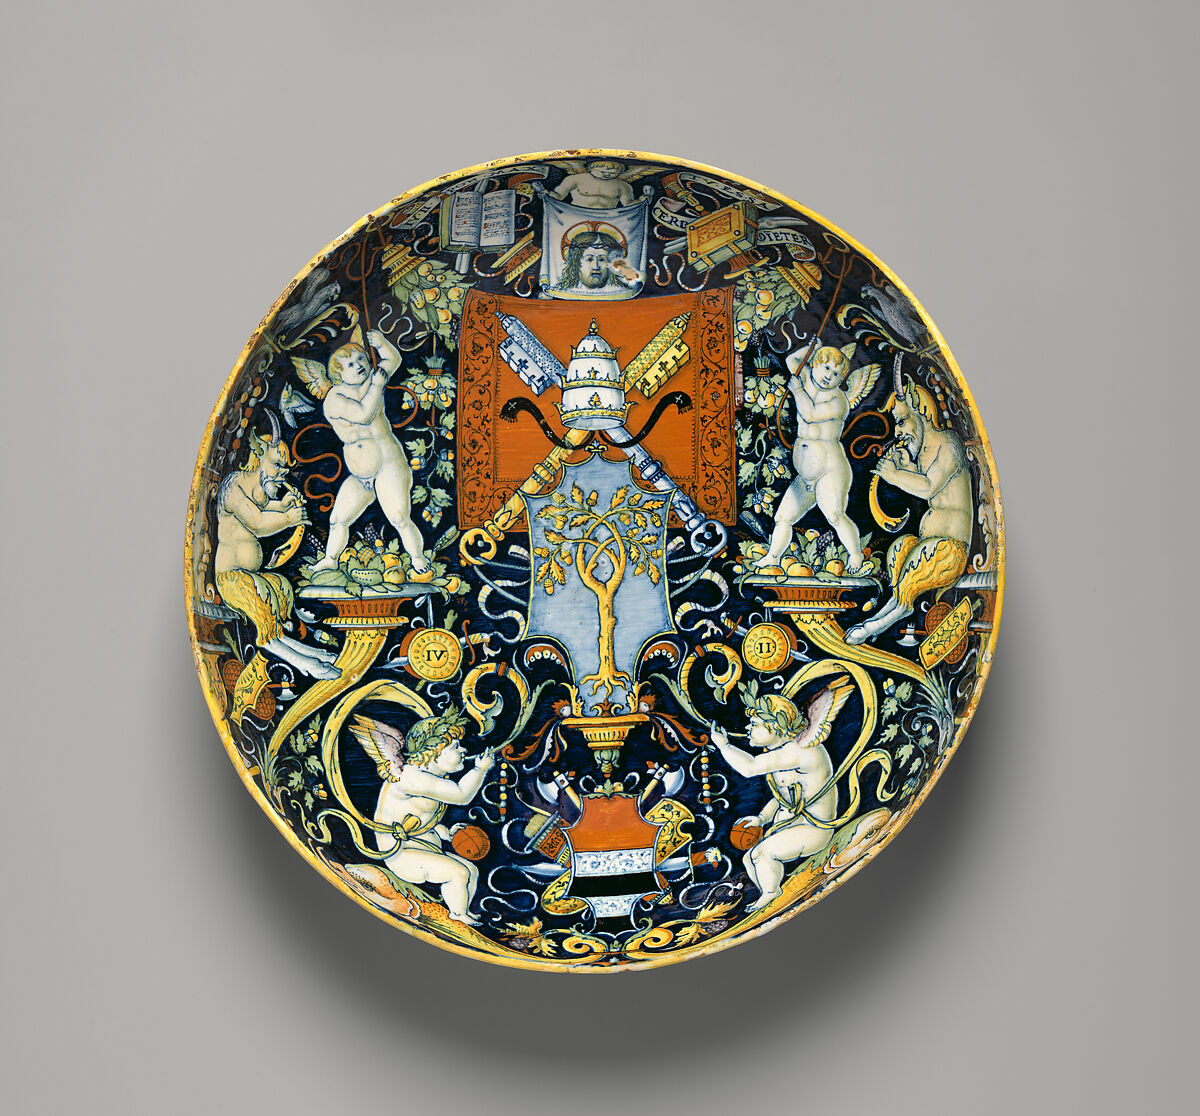 Bowl with the Arms of Pope Julius II and the Manzoli of Bologna surrounded by putti, cornucopiae, satyrs, dolphins, birds, etc., workshop of Giovanni Maria Vasaro (Italian (Castel Durante), active early 16th century), Maiolica (tin-glazed earthenware), Italian, Castel Durante 